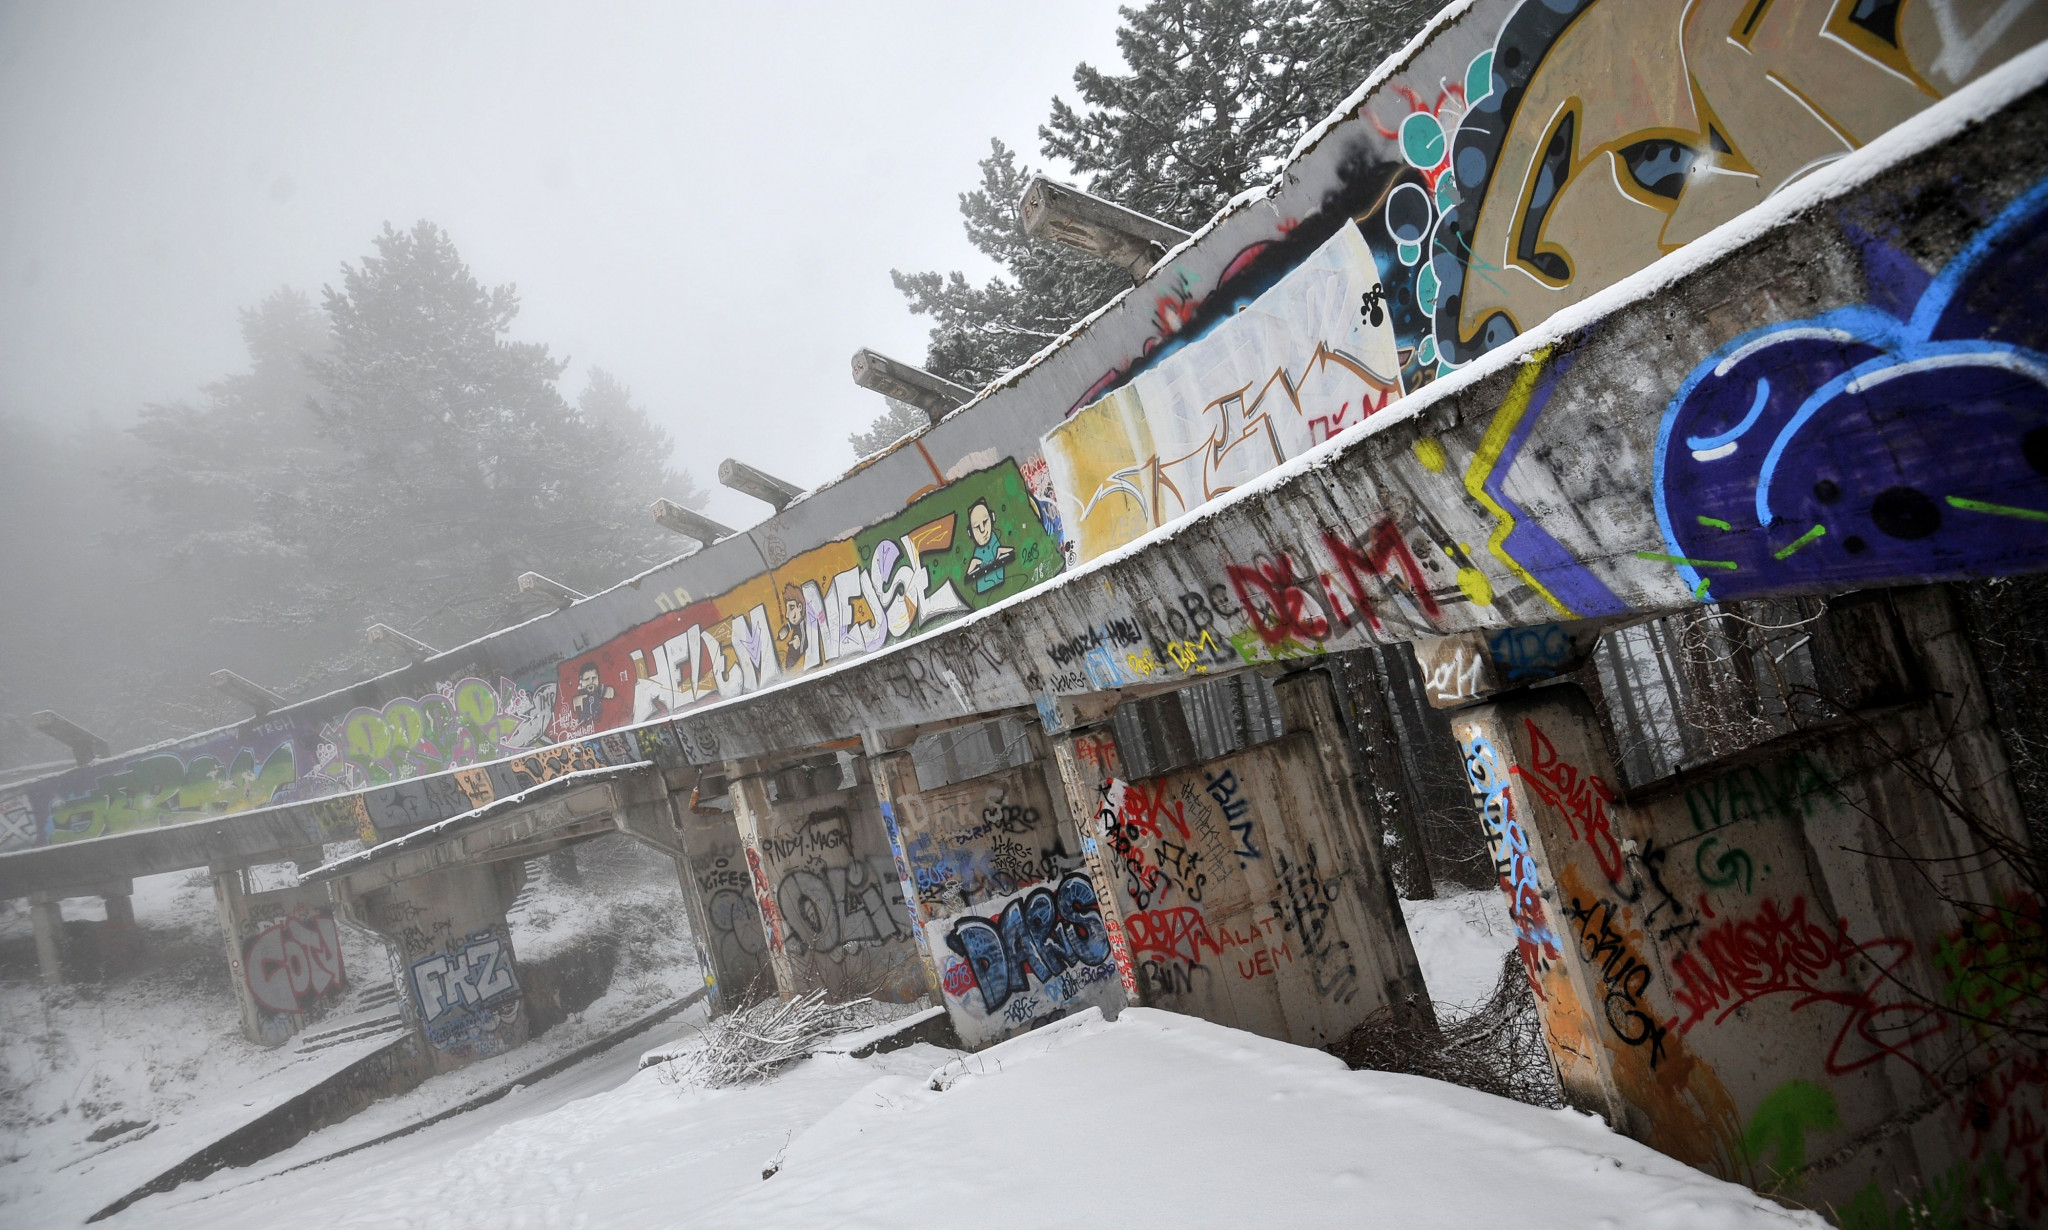 The Sarajevo 1984 sliding track, pictured covered in graffiti in 2019 ©Getty Images